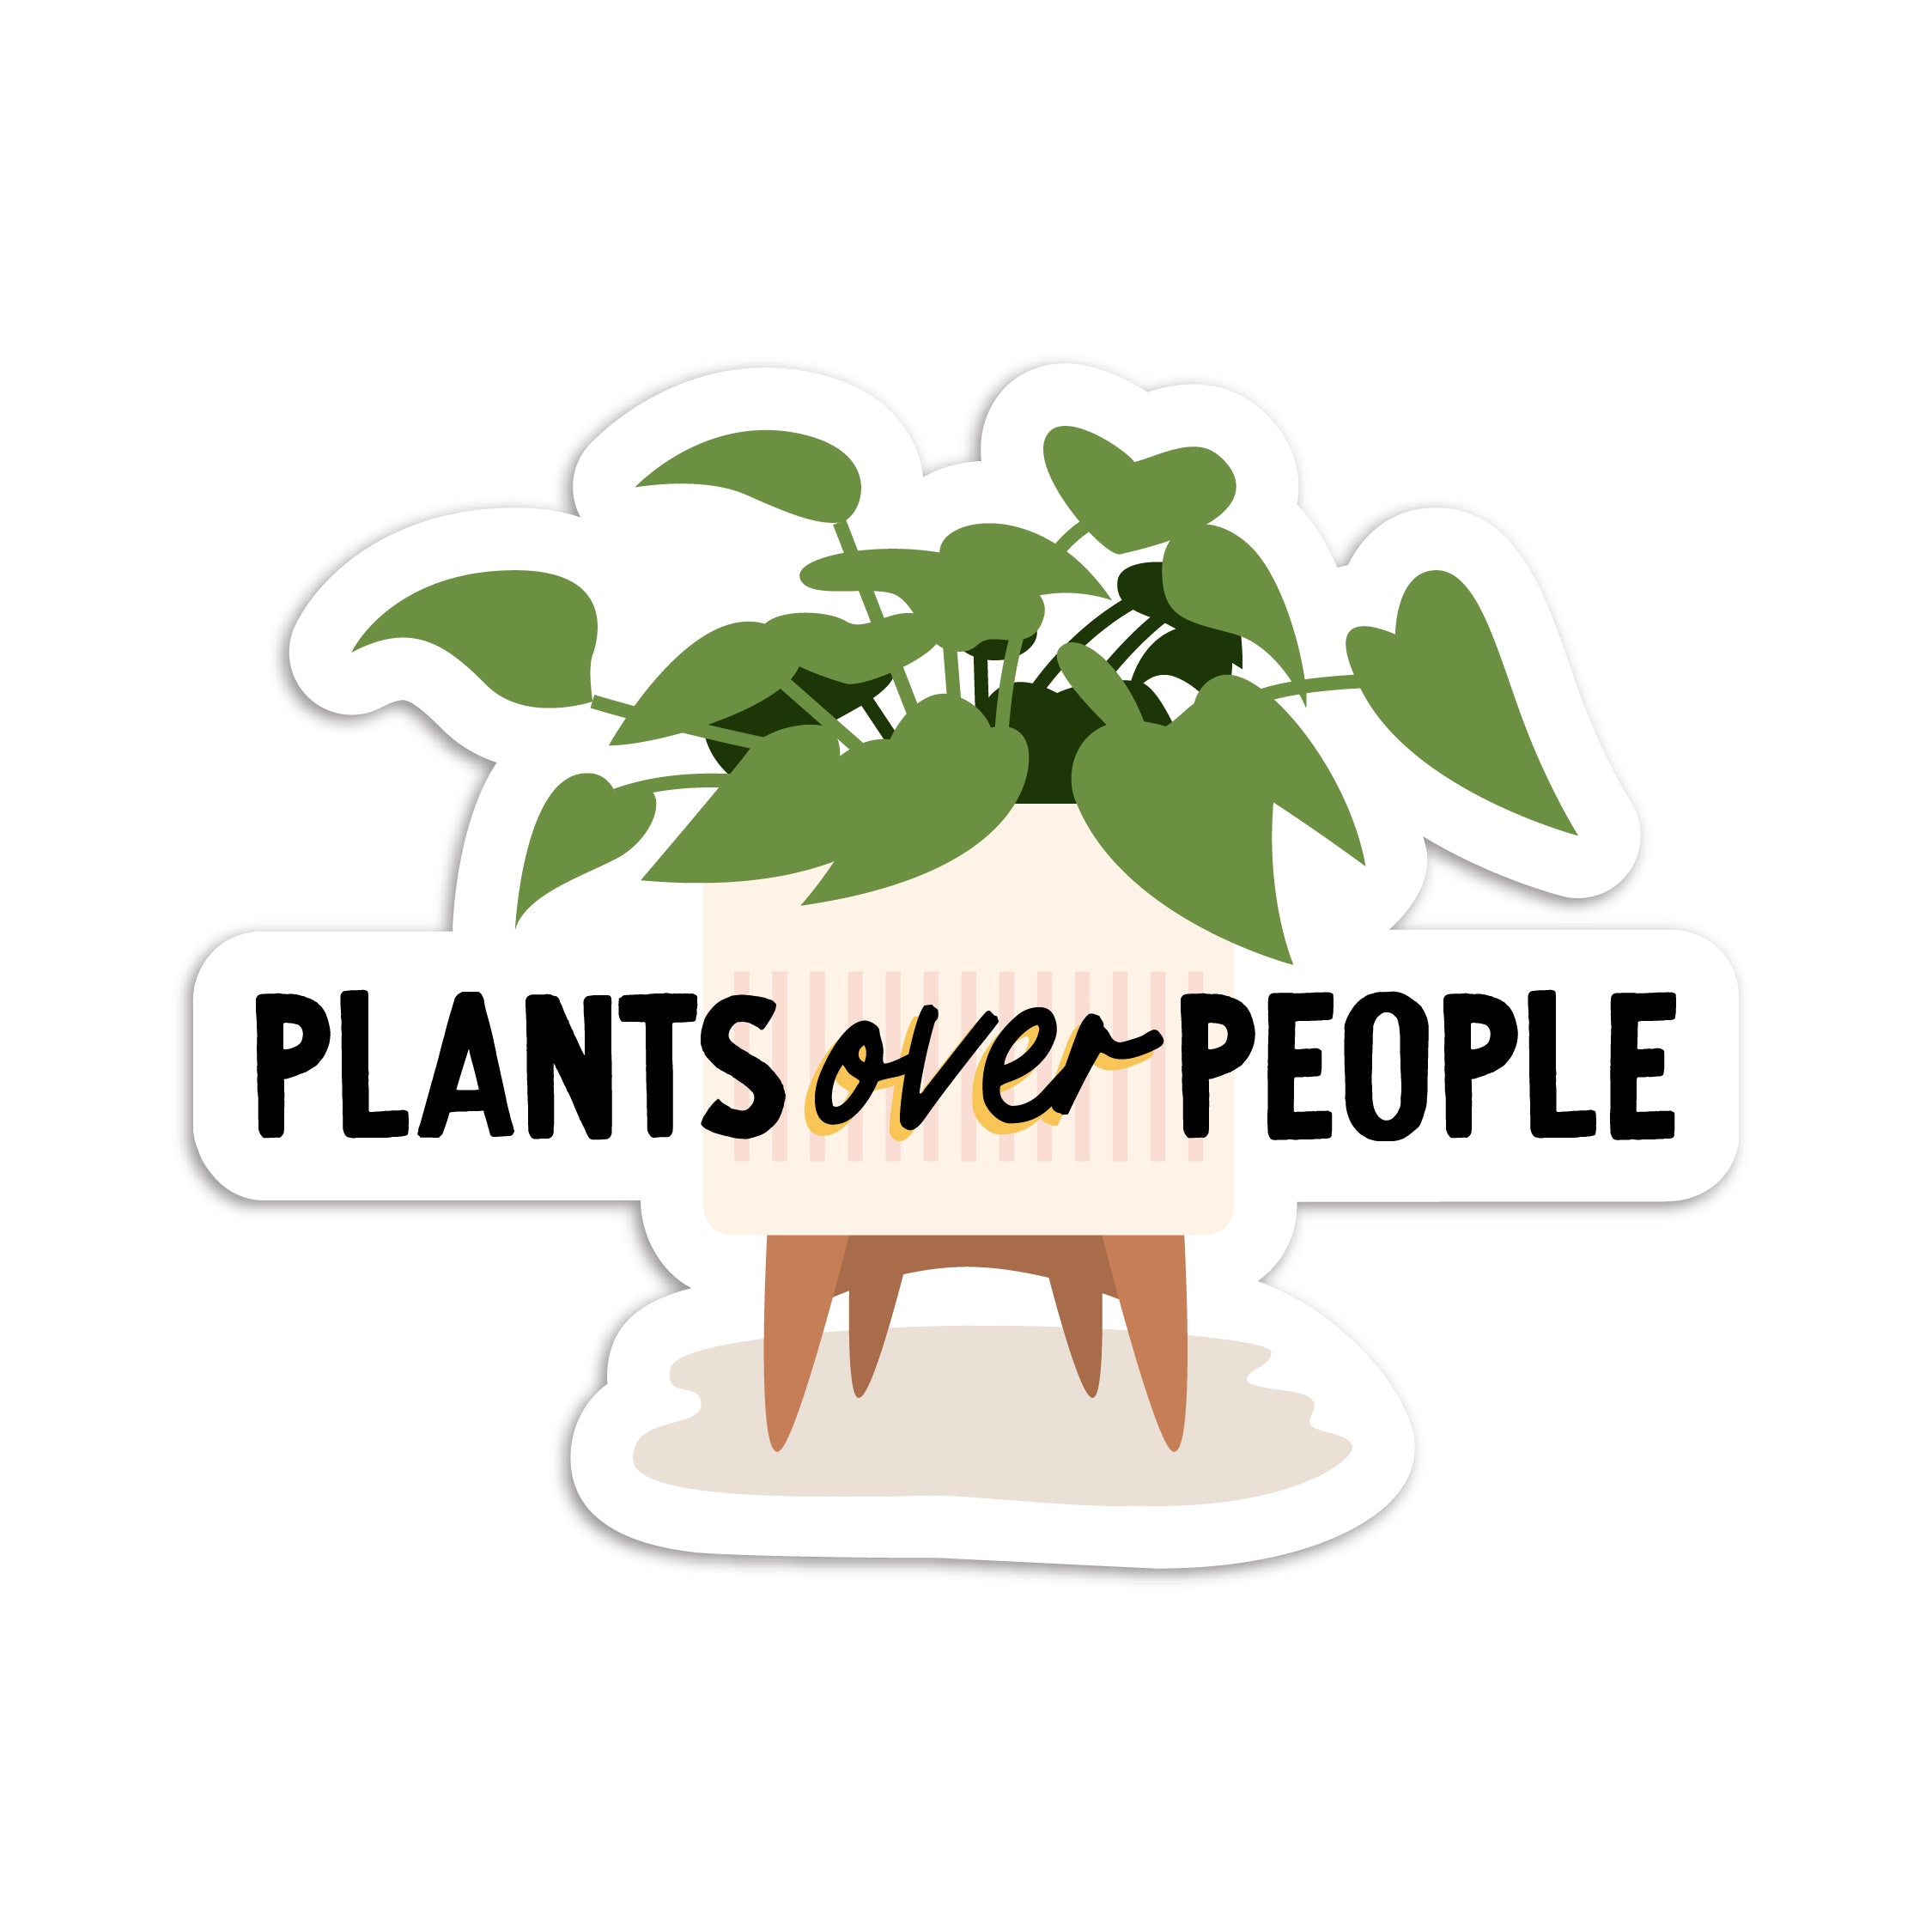 Plants over people vinyl sticker by I&